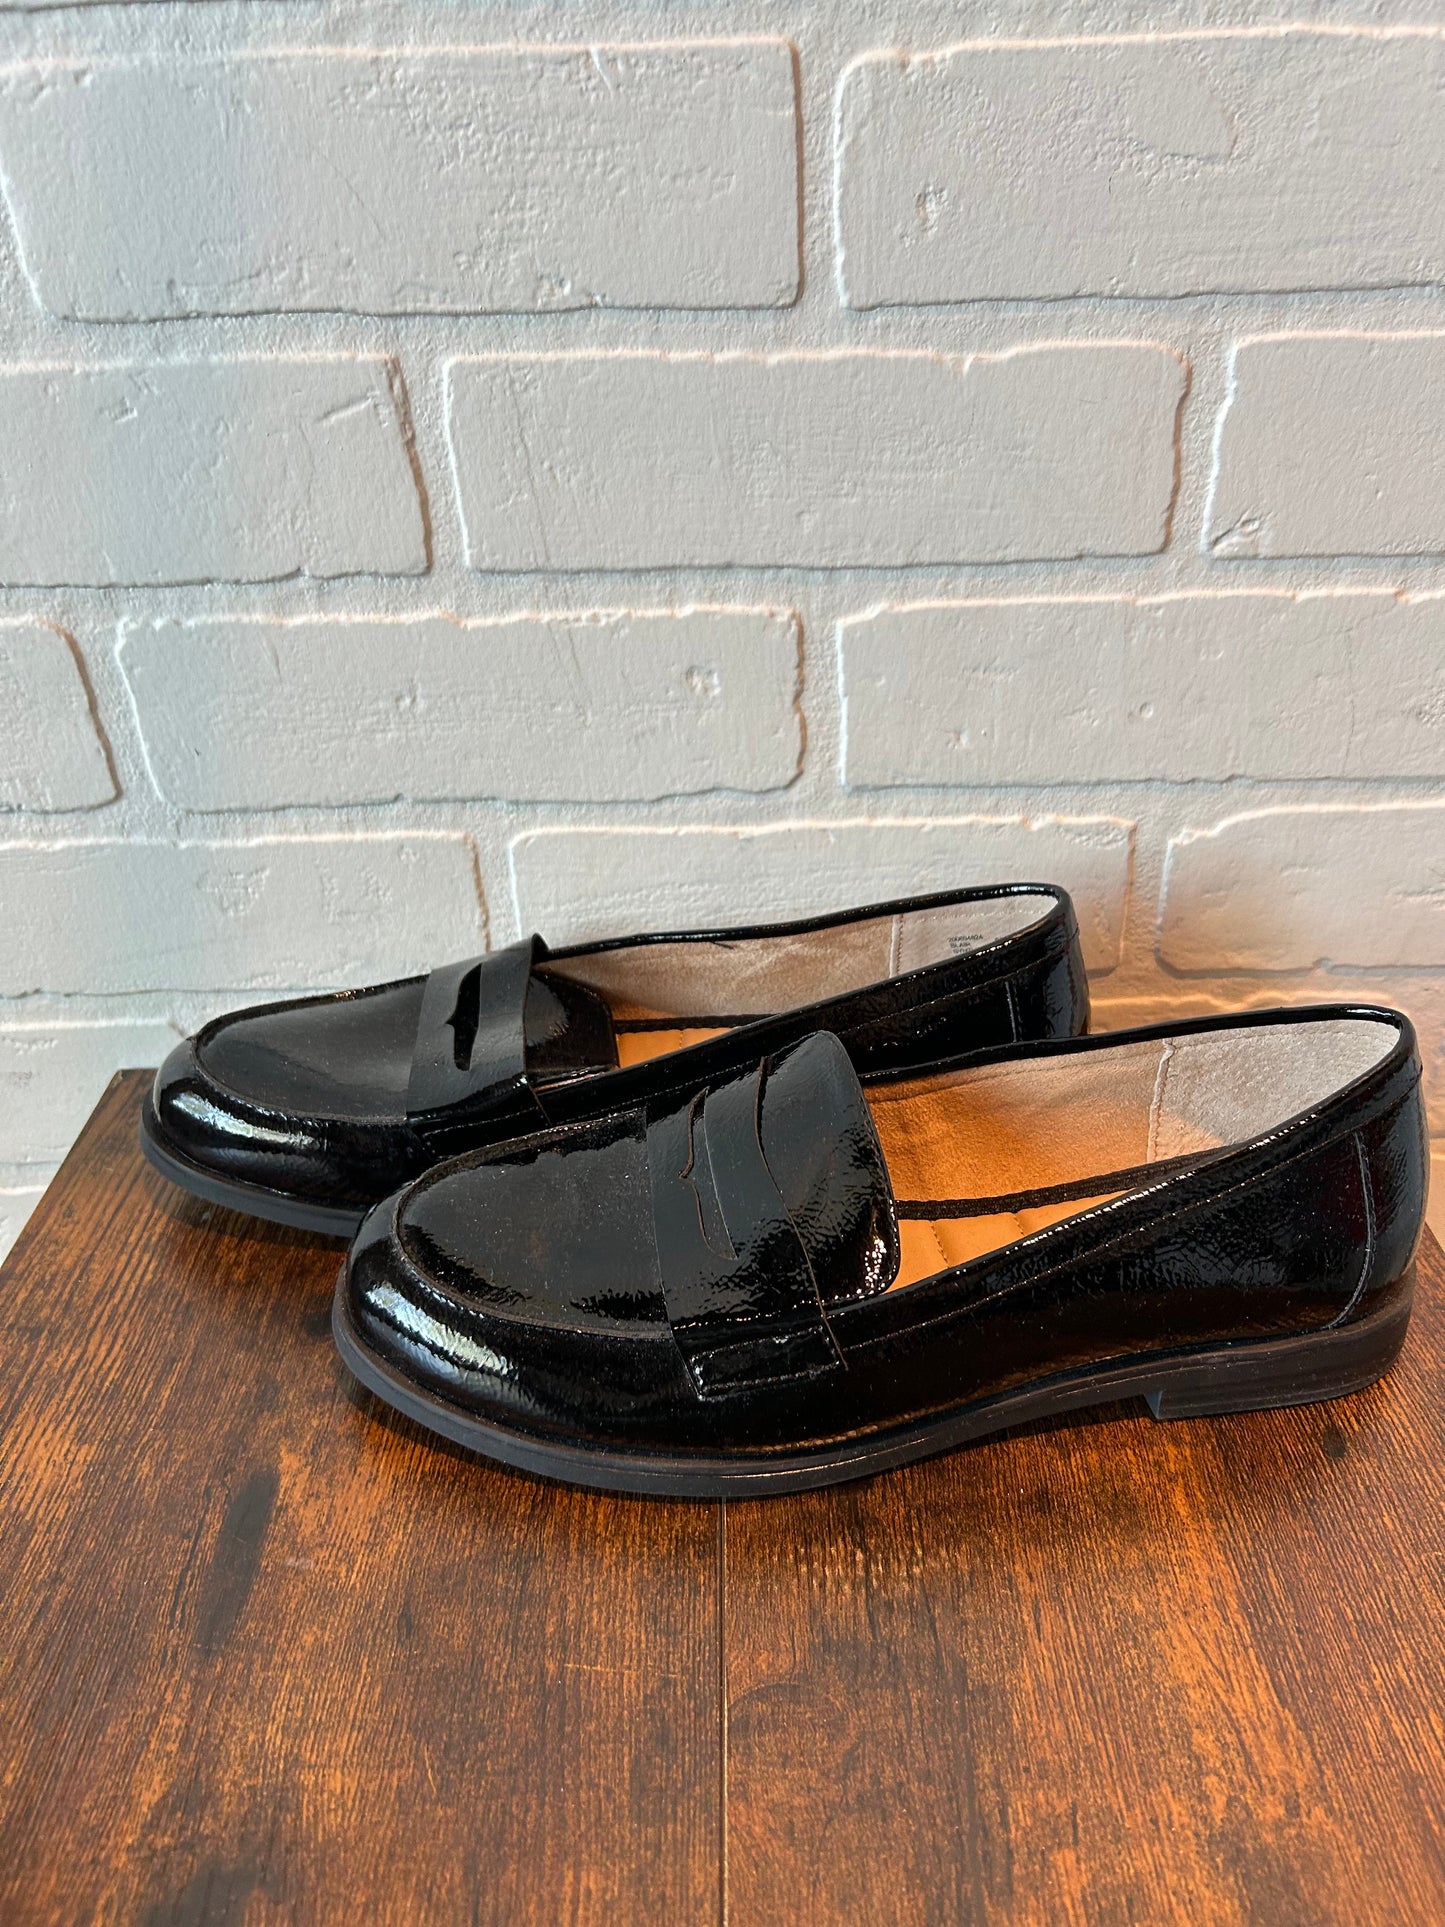 Black Shoes Flats Kelly And Katie, Size 9